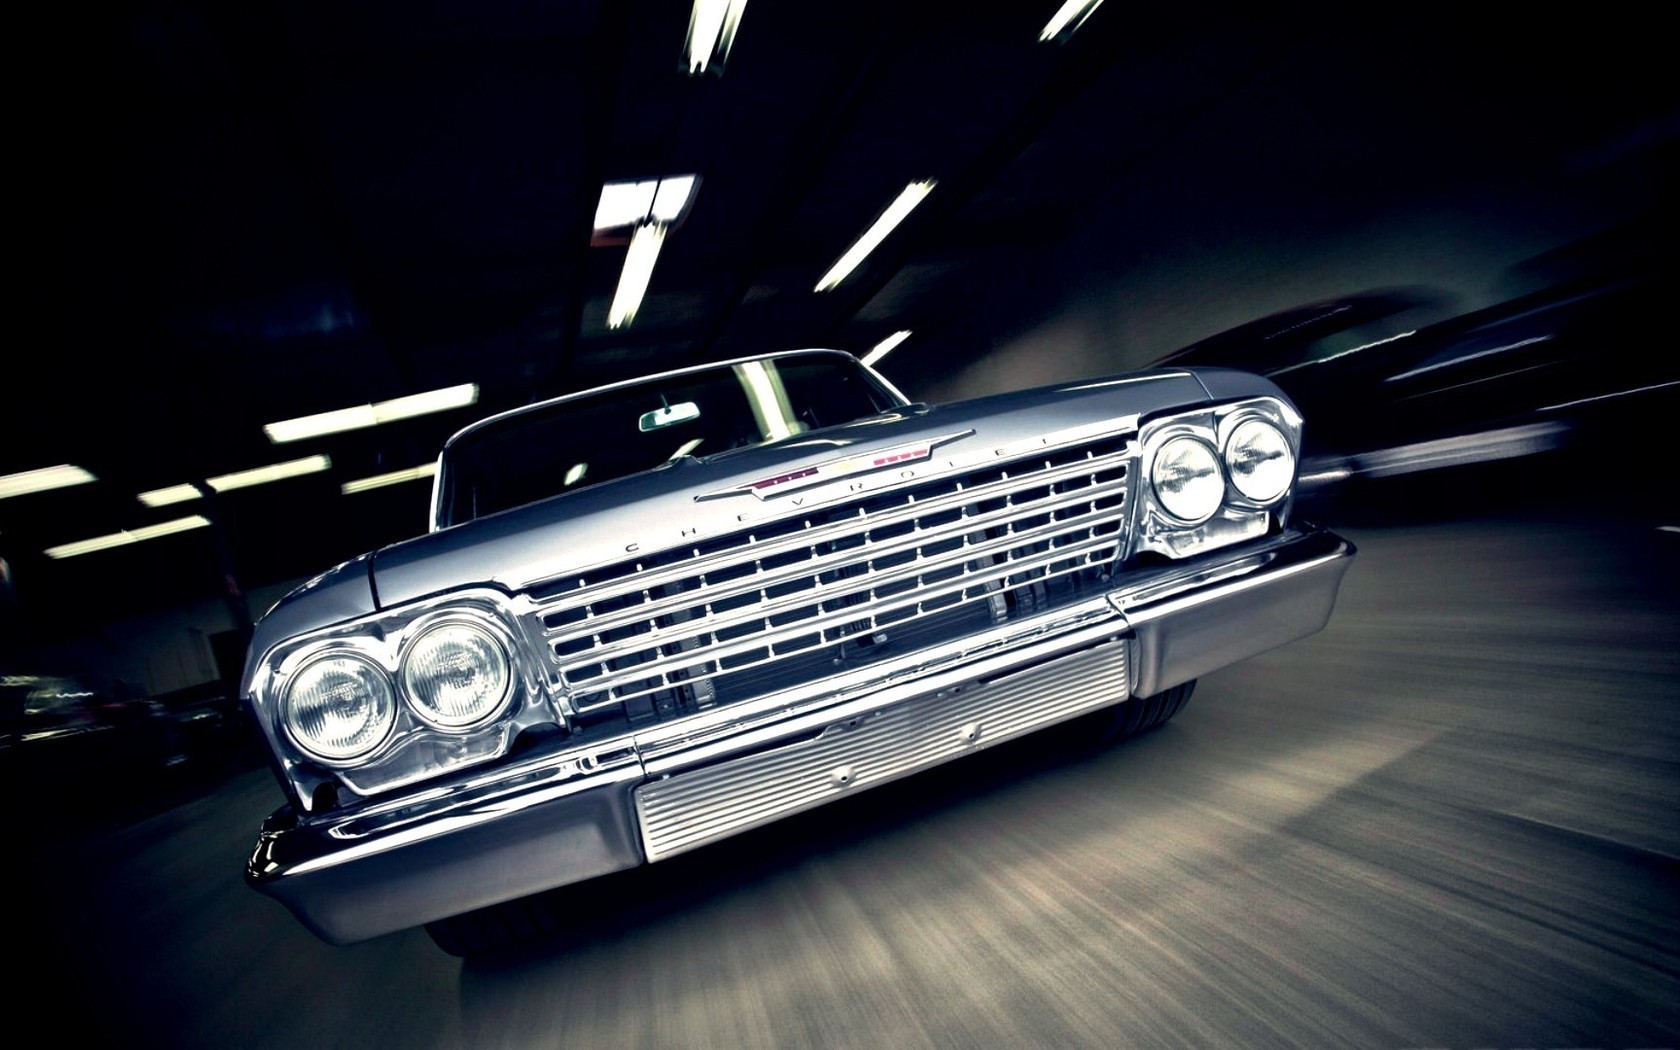 Chevy Wide HD Wallpaper For Desktop Background Images